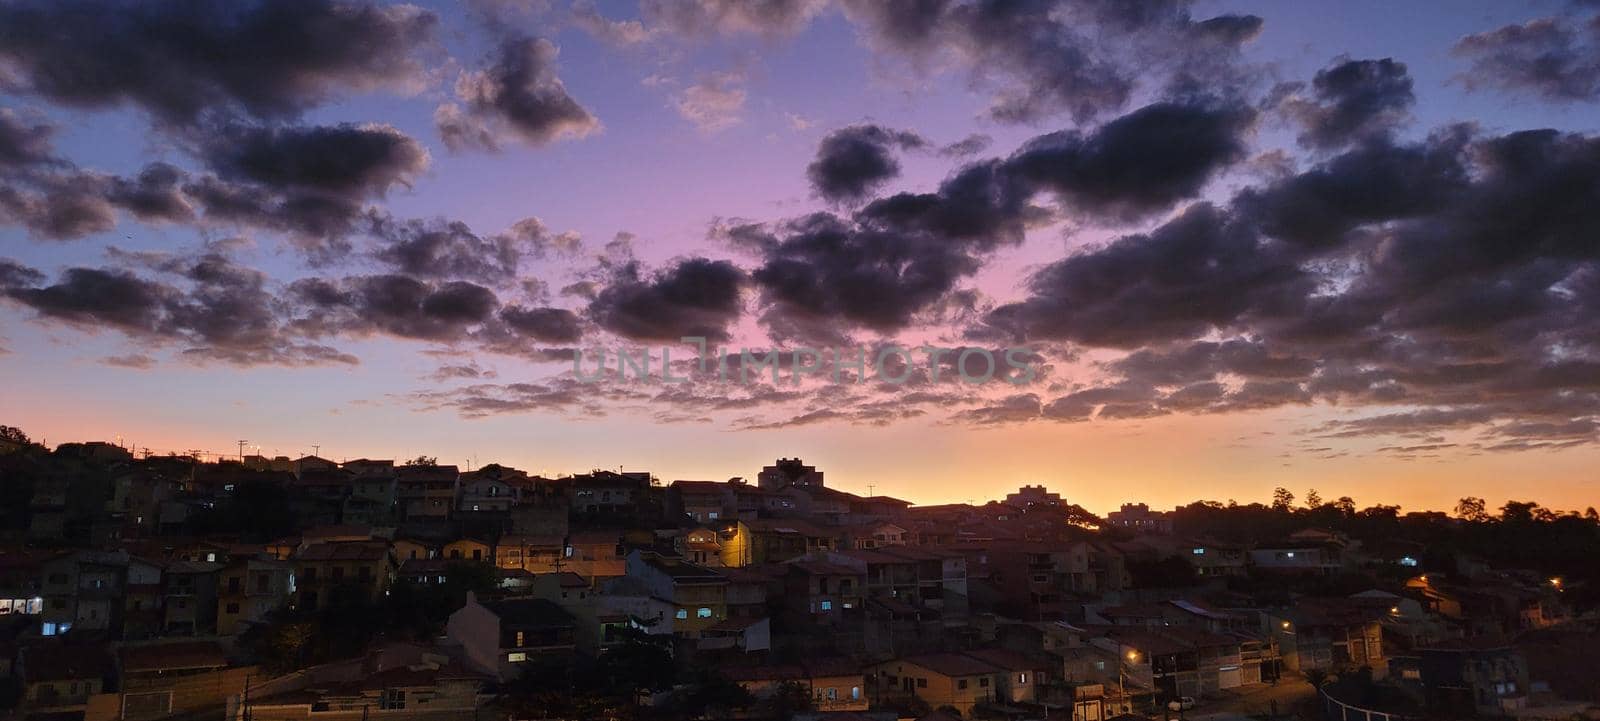 image of sky in the late afternoon in Brazil by sarsa